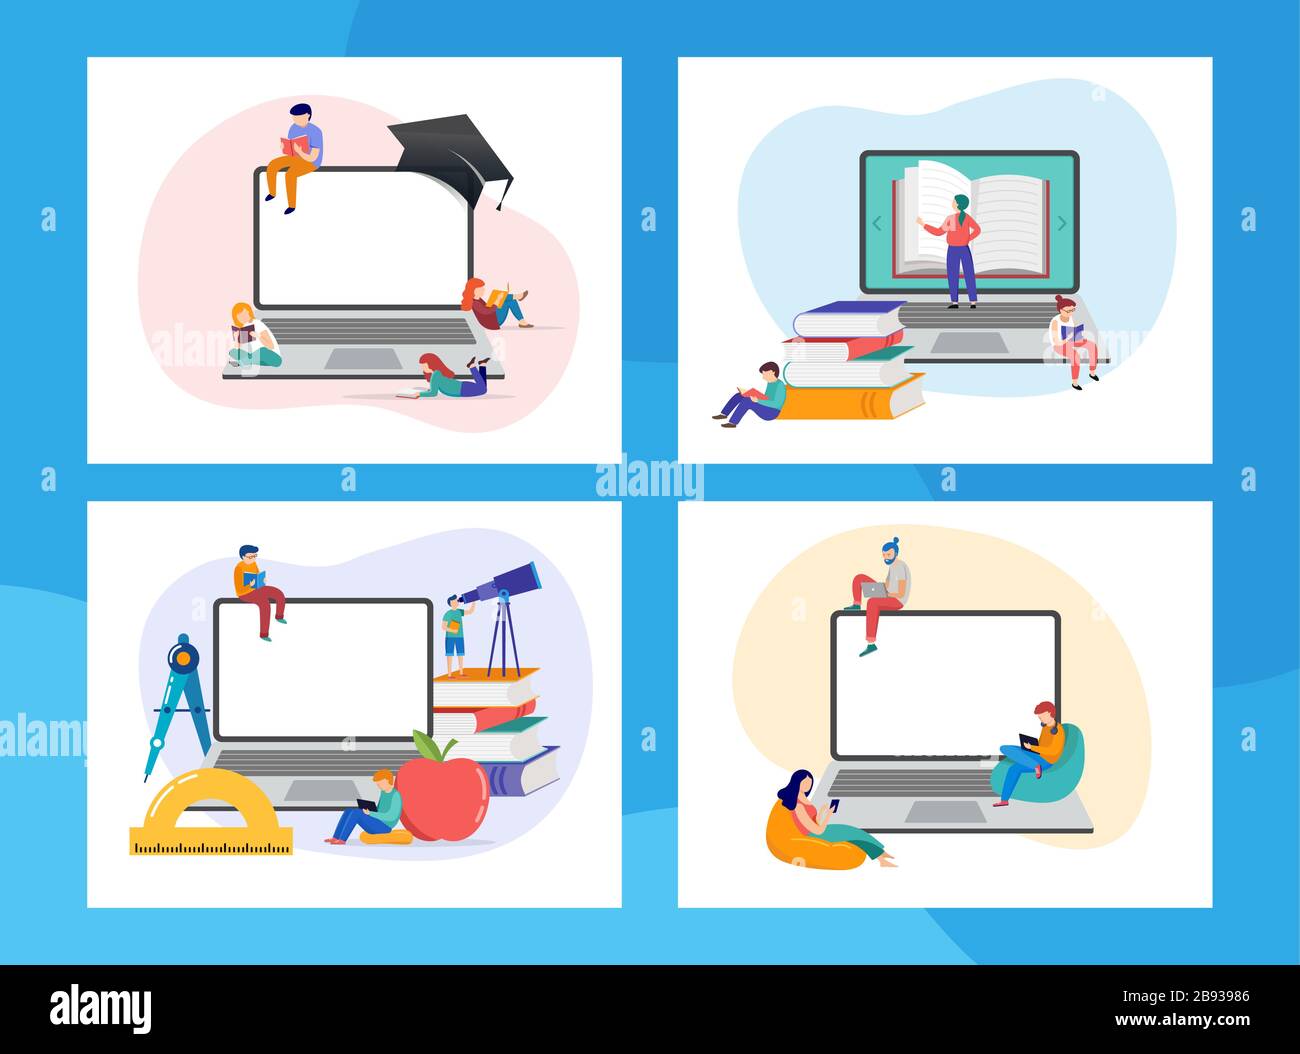 E-learning, online education at home. Modern vector illustration concepts for website and mobile website development Stock Vector